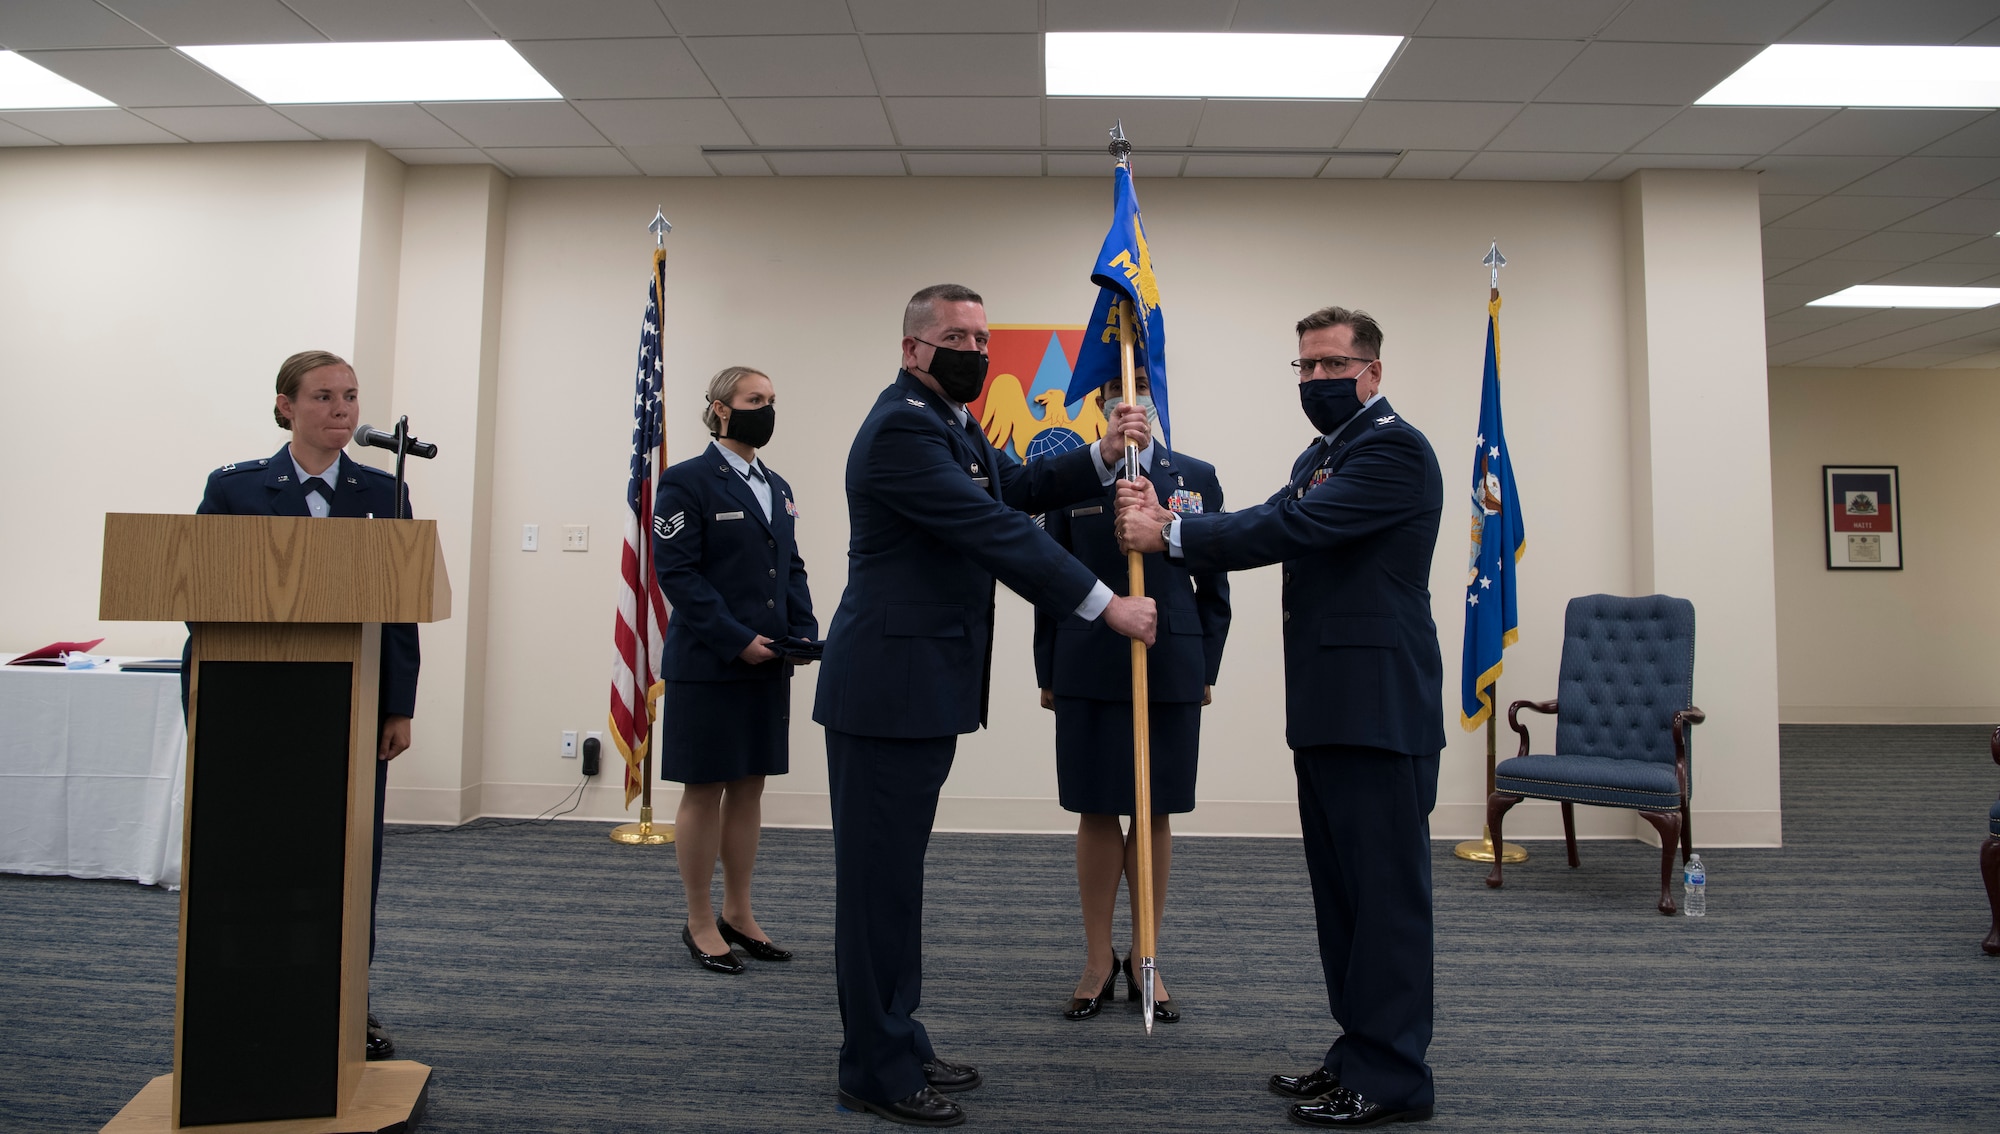 U.S. Air Force officers hold guidon